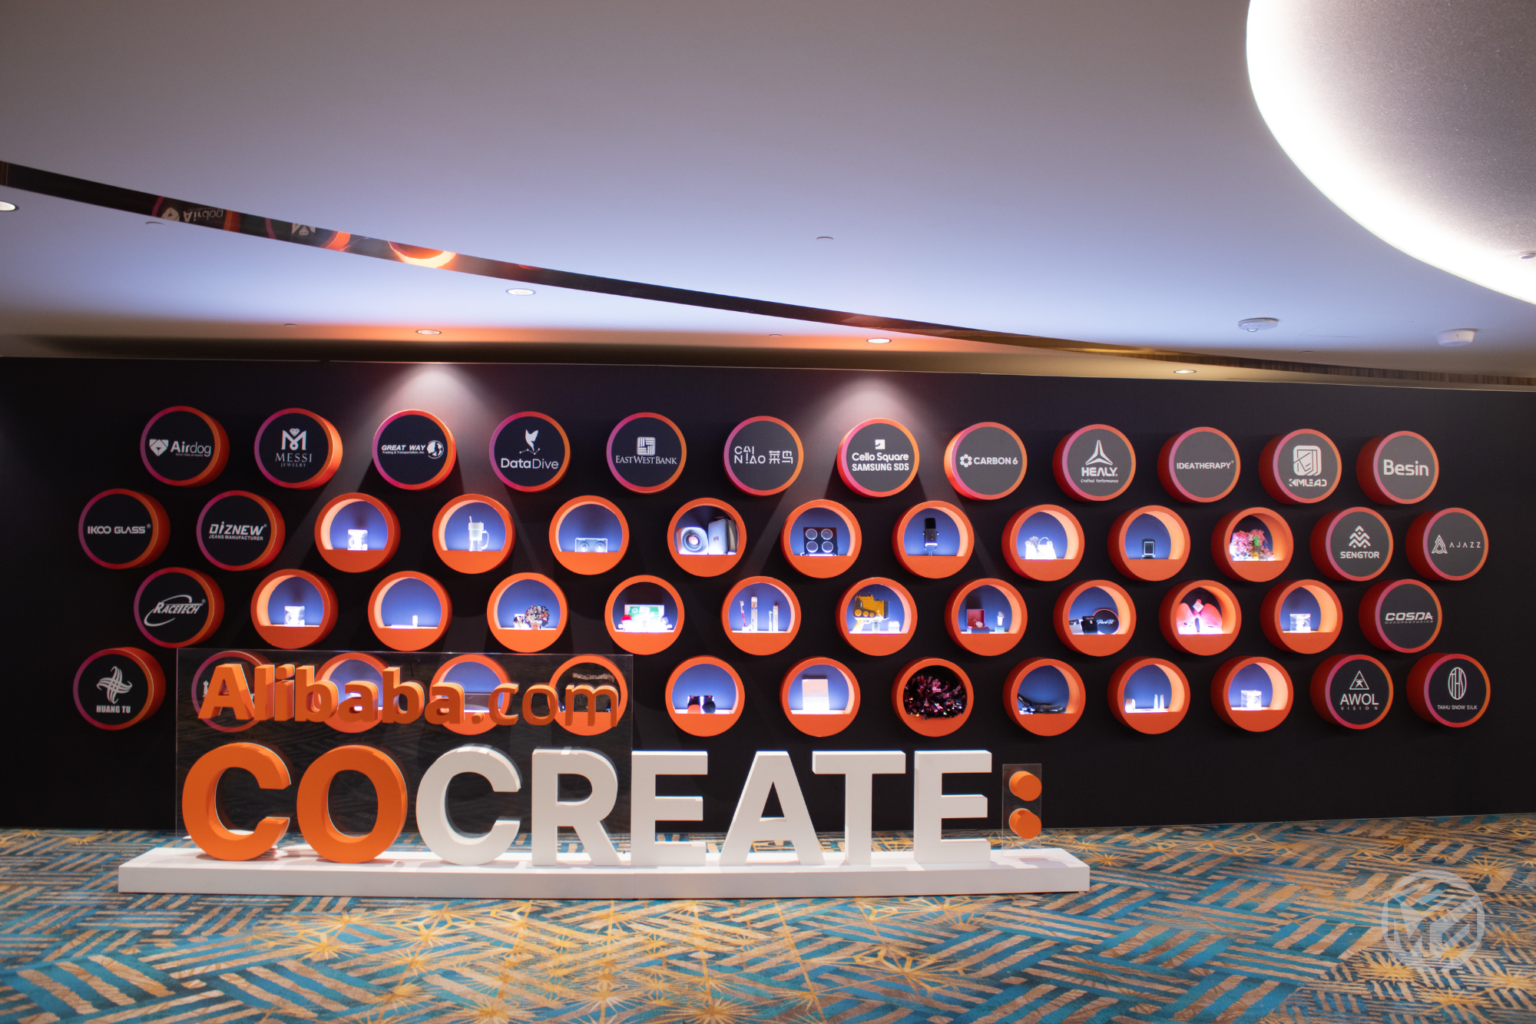 CoCreate 2023 with Alibaba.com Supplier Wall